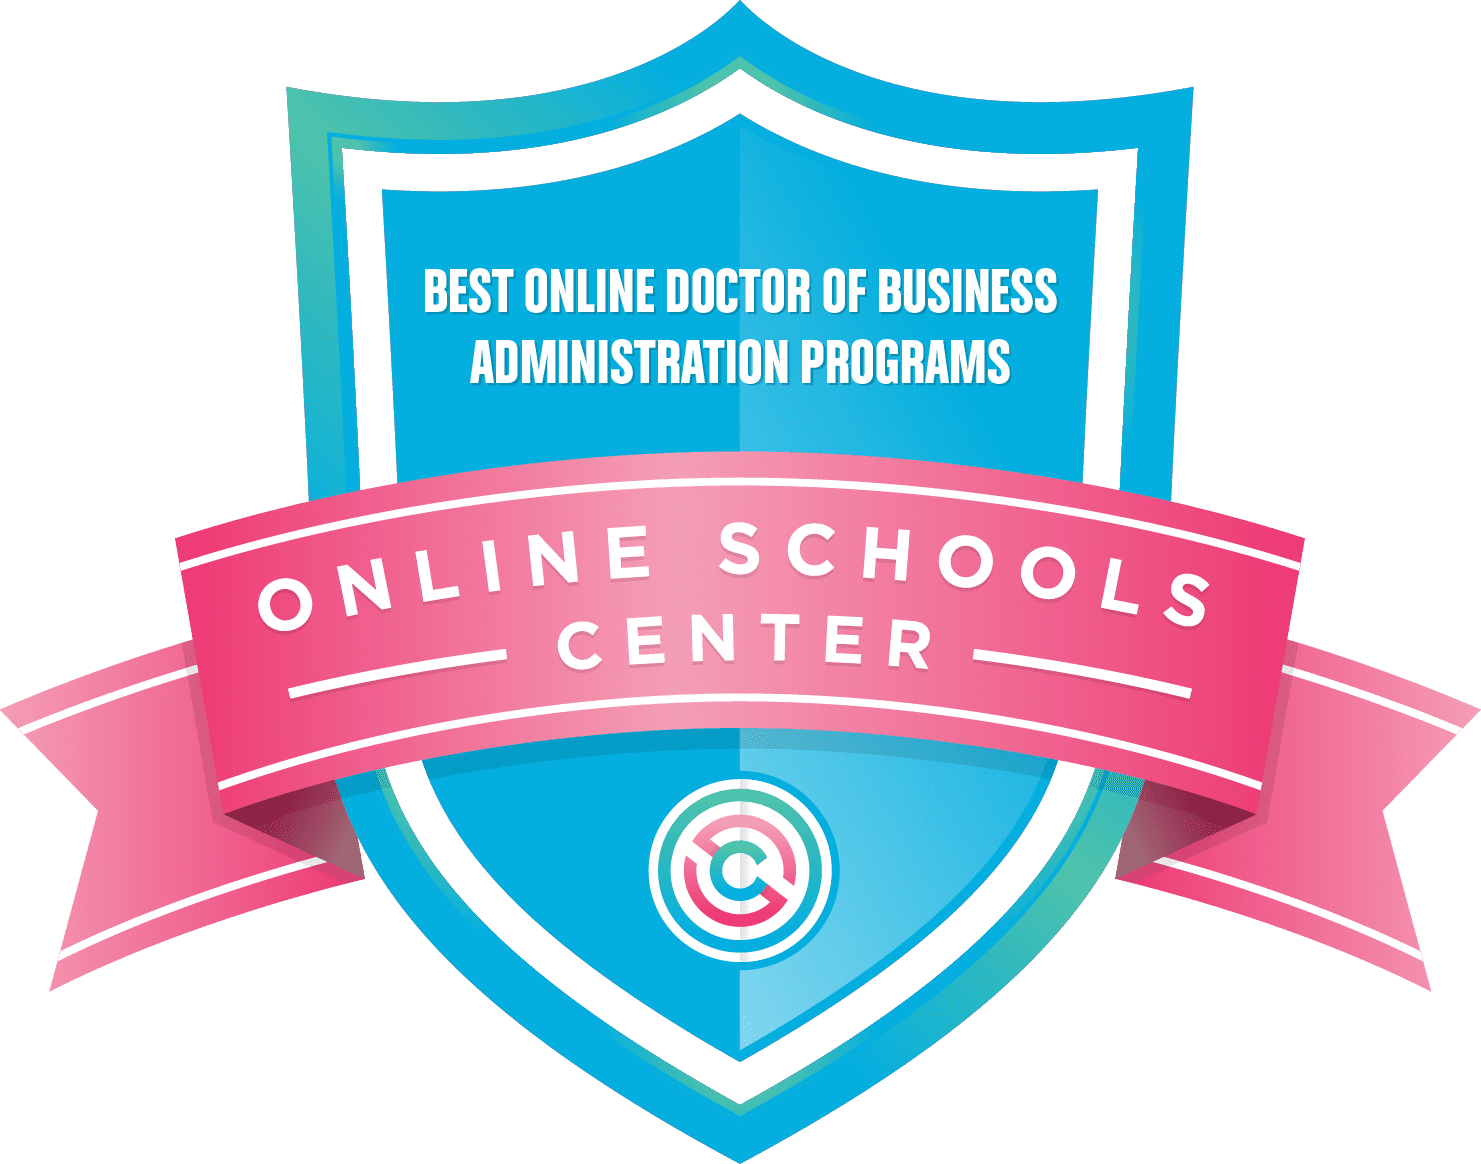 The Top 20 Online Doctor of Business Administration (DBA) Programs in 2021